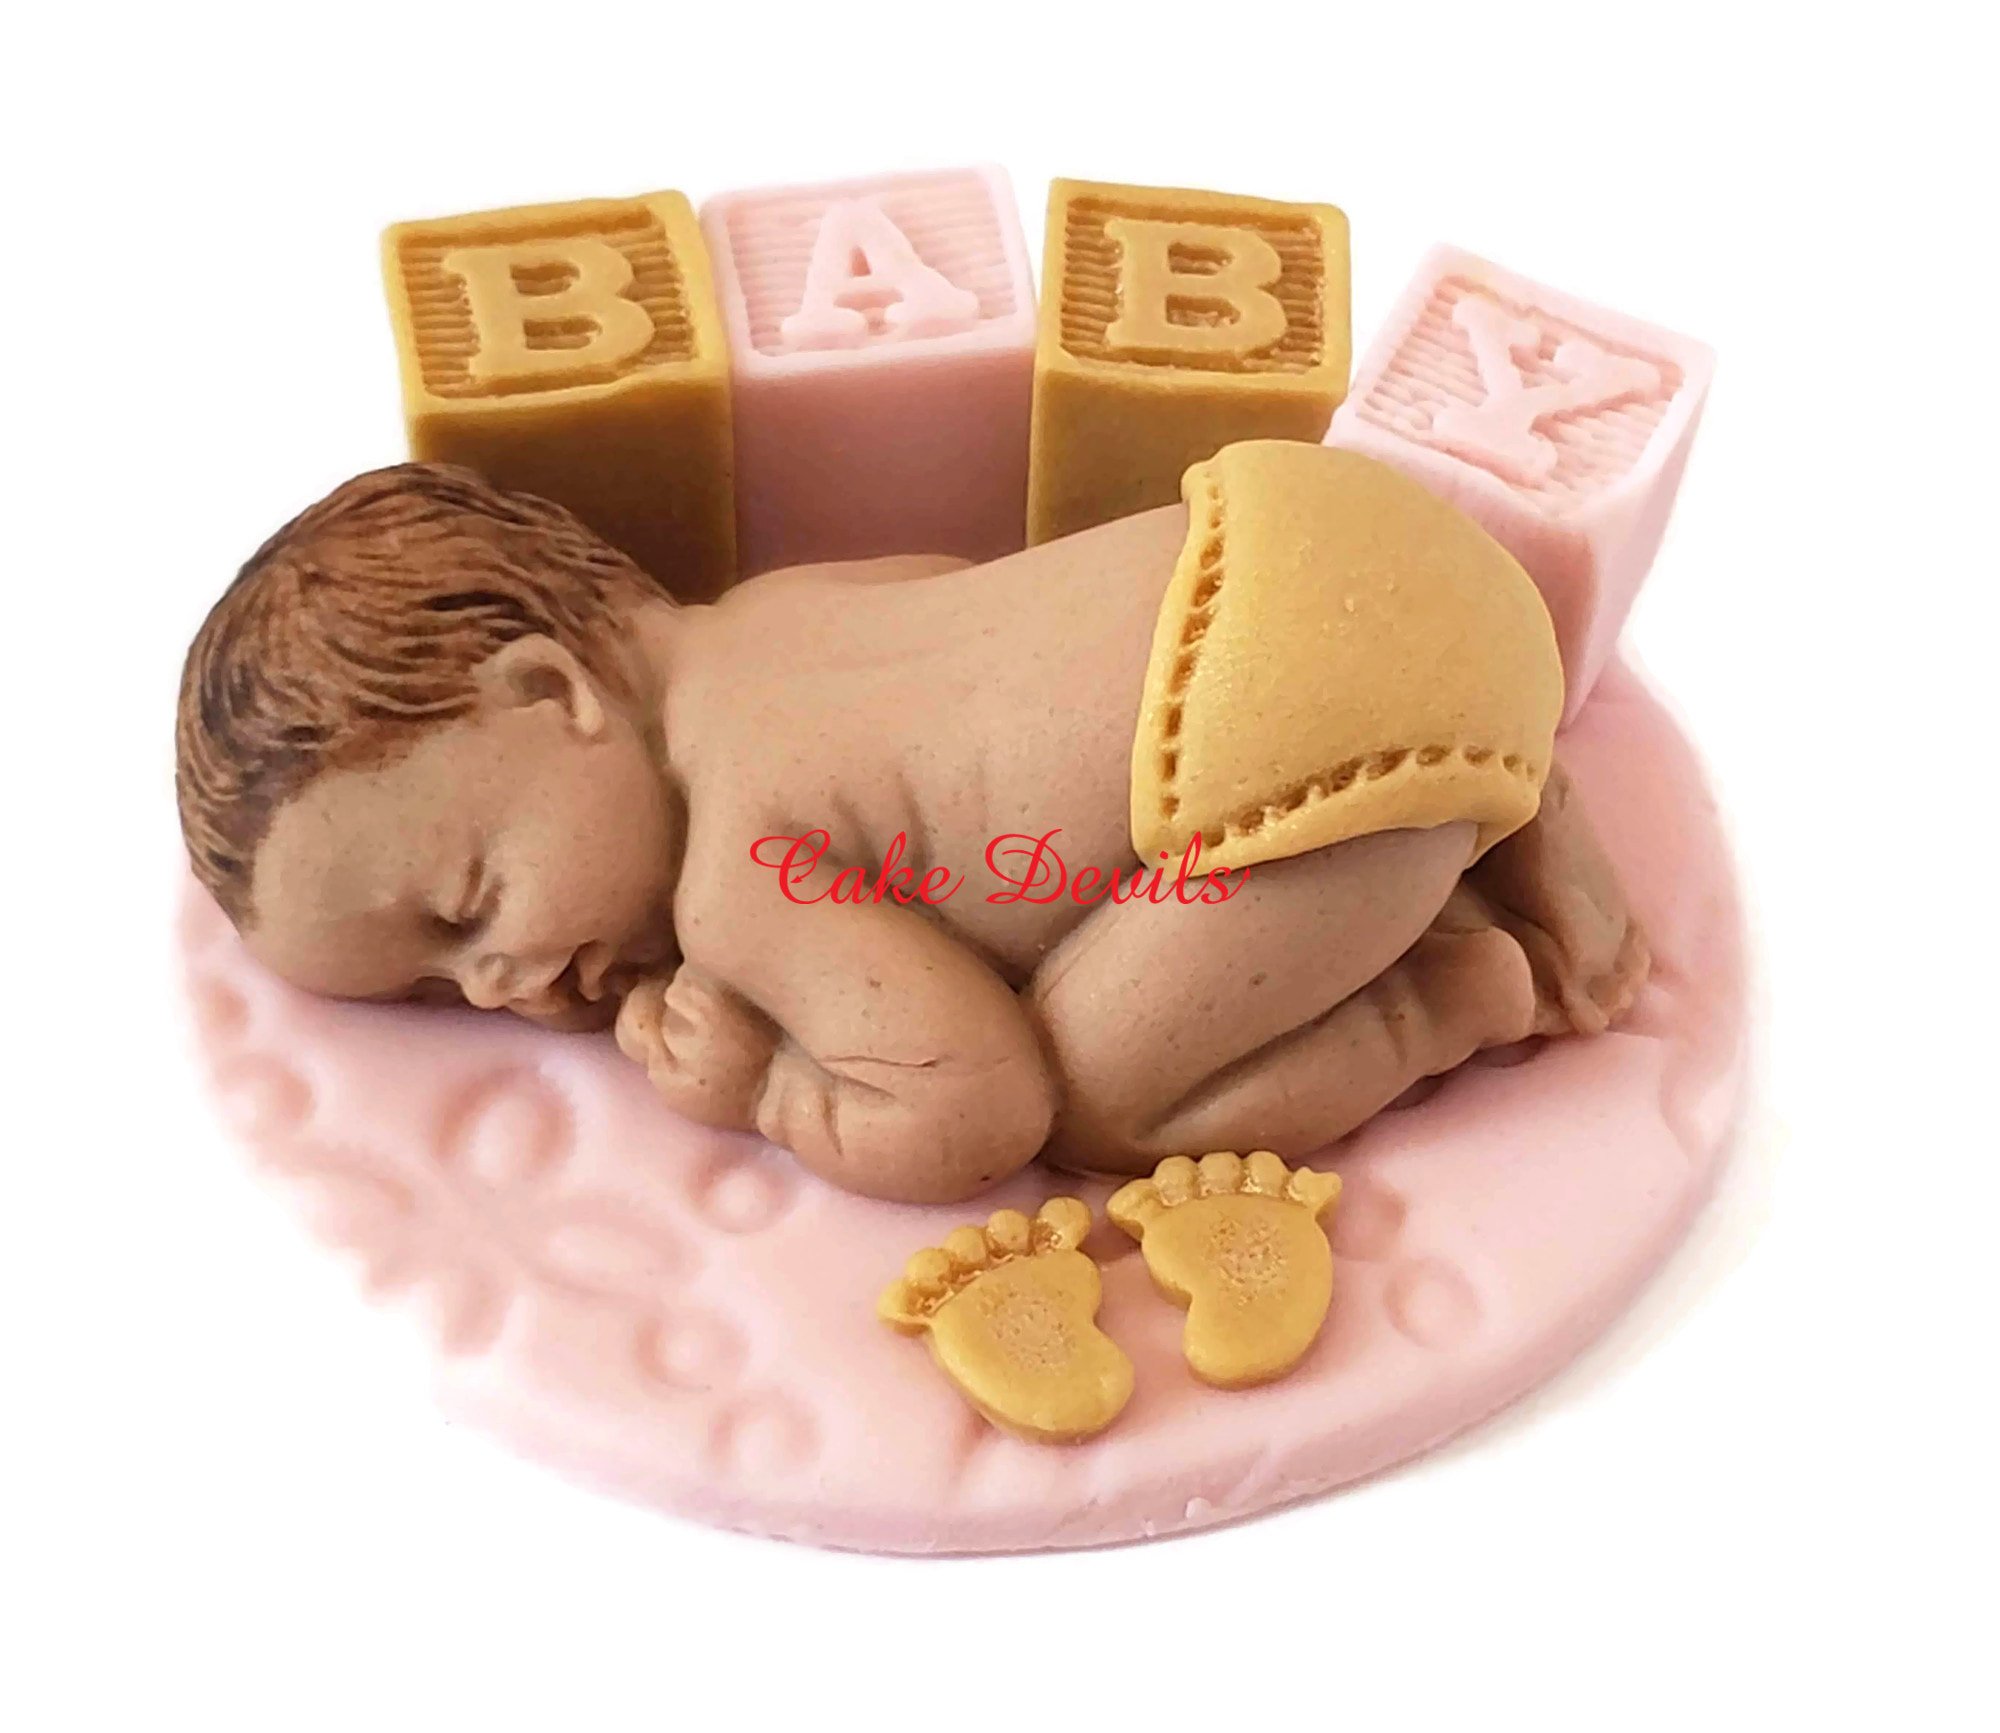 Fondant Baby Shower Cake Topper with Blocks, Letters in Hearts, Edible Baby  Blocks Cake Decorations, Hearts on Sticks, Name, Naked Baby